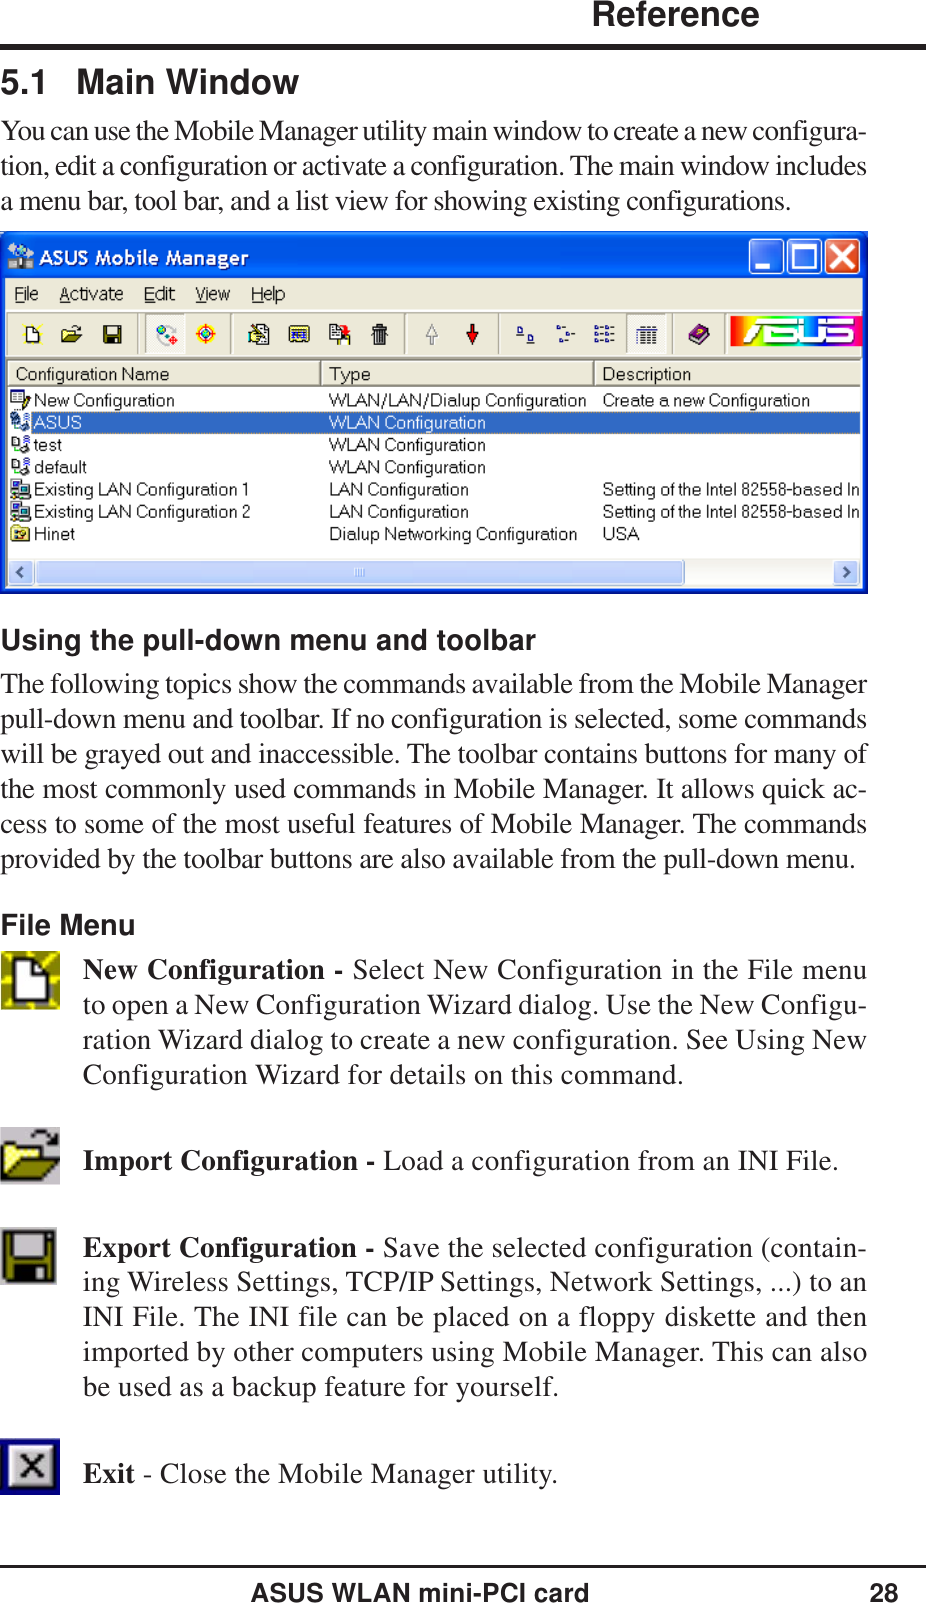 ASUS WLAN mini-PCI card 28             ReferenceChapter 35.1 Main WindowYou can use the Mobile Manager utility main window to create a new configura-tion, edit a configuration or activate a configuration. The main window includesa menu bar, tool bar, and a list view for showing existing configurations.Using the pull-down menu and toolbarThe following topics show the commands available from the Mobile Managerpull-down menu and toolbar. If no configuration is selected, some commandswill be grayed out and inaccessible. The toolbar contains buttons for many ofthe most commonly used commands in Mobile Manager. It allows quick ac-cess to some of the most useful features of Mobile Manager. The commandsprovided by the toolbar buttons are also available from the pull-down menu.File MenuNew Configuration - Select New Configuration in the File menuto open a New Configuration Wizard dialog. Use the New Configu-ration Wizard dialog to create a new configuration. See Using NewConfiguration Wizard for details on this command.Import Configuration - Load a configuration from an INI File.Export Configuration - Save the selected configuration (contain-ing Wireless Settings, TCP/IP Settings, Network Settings, ...) to anINI File. The INI file can be placed on a floppy diskette and thenimported by other computers using Mobile Manager. This can alsobe used as a backup feature for yourself.Exit - Close the Mobile Manager utility.